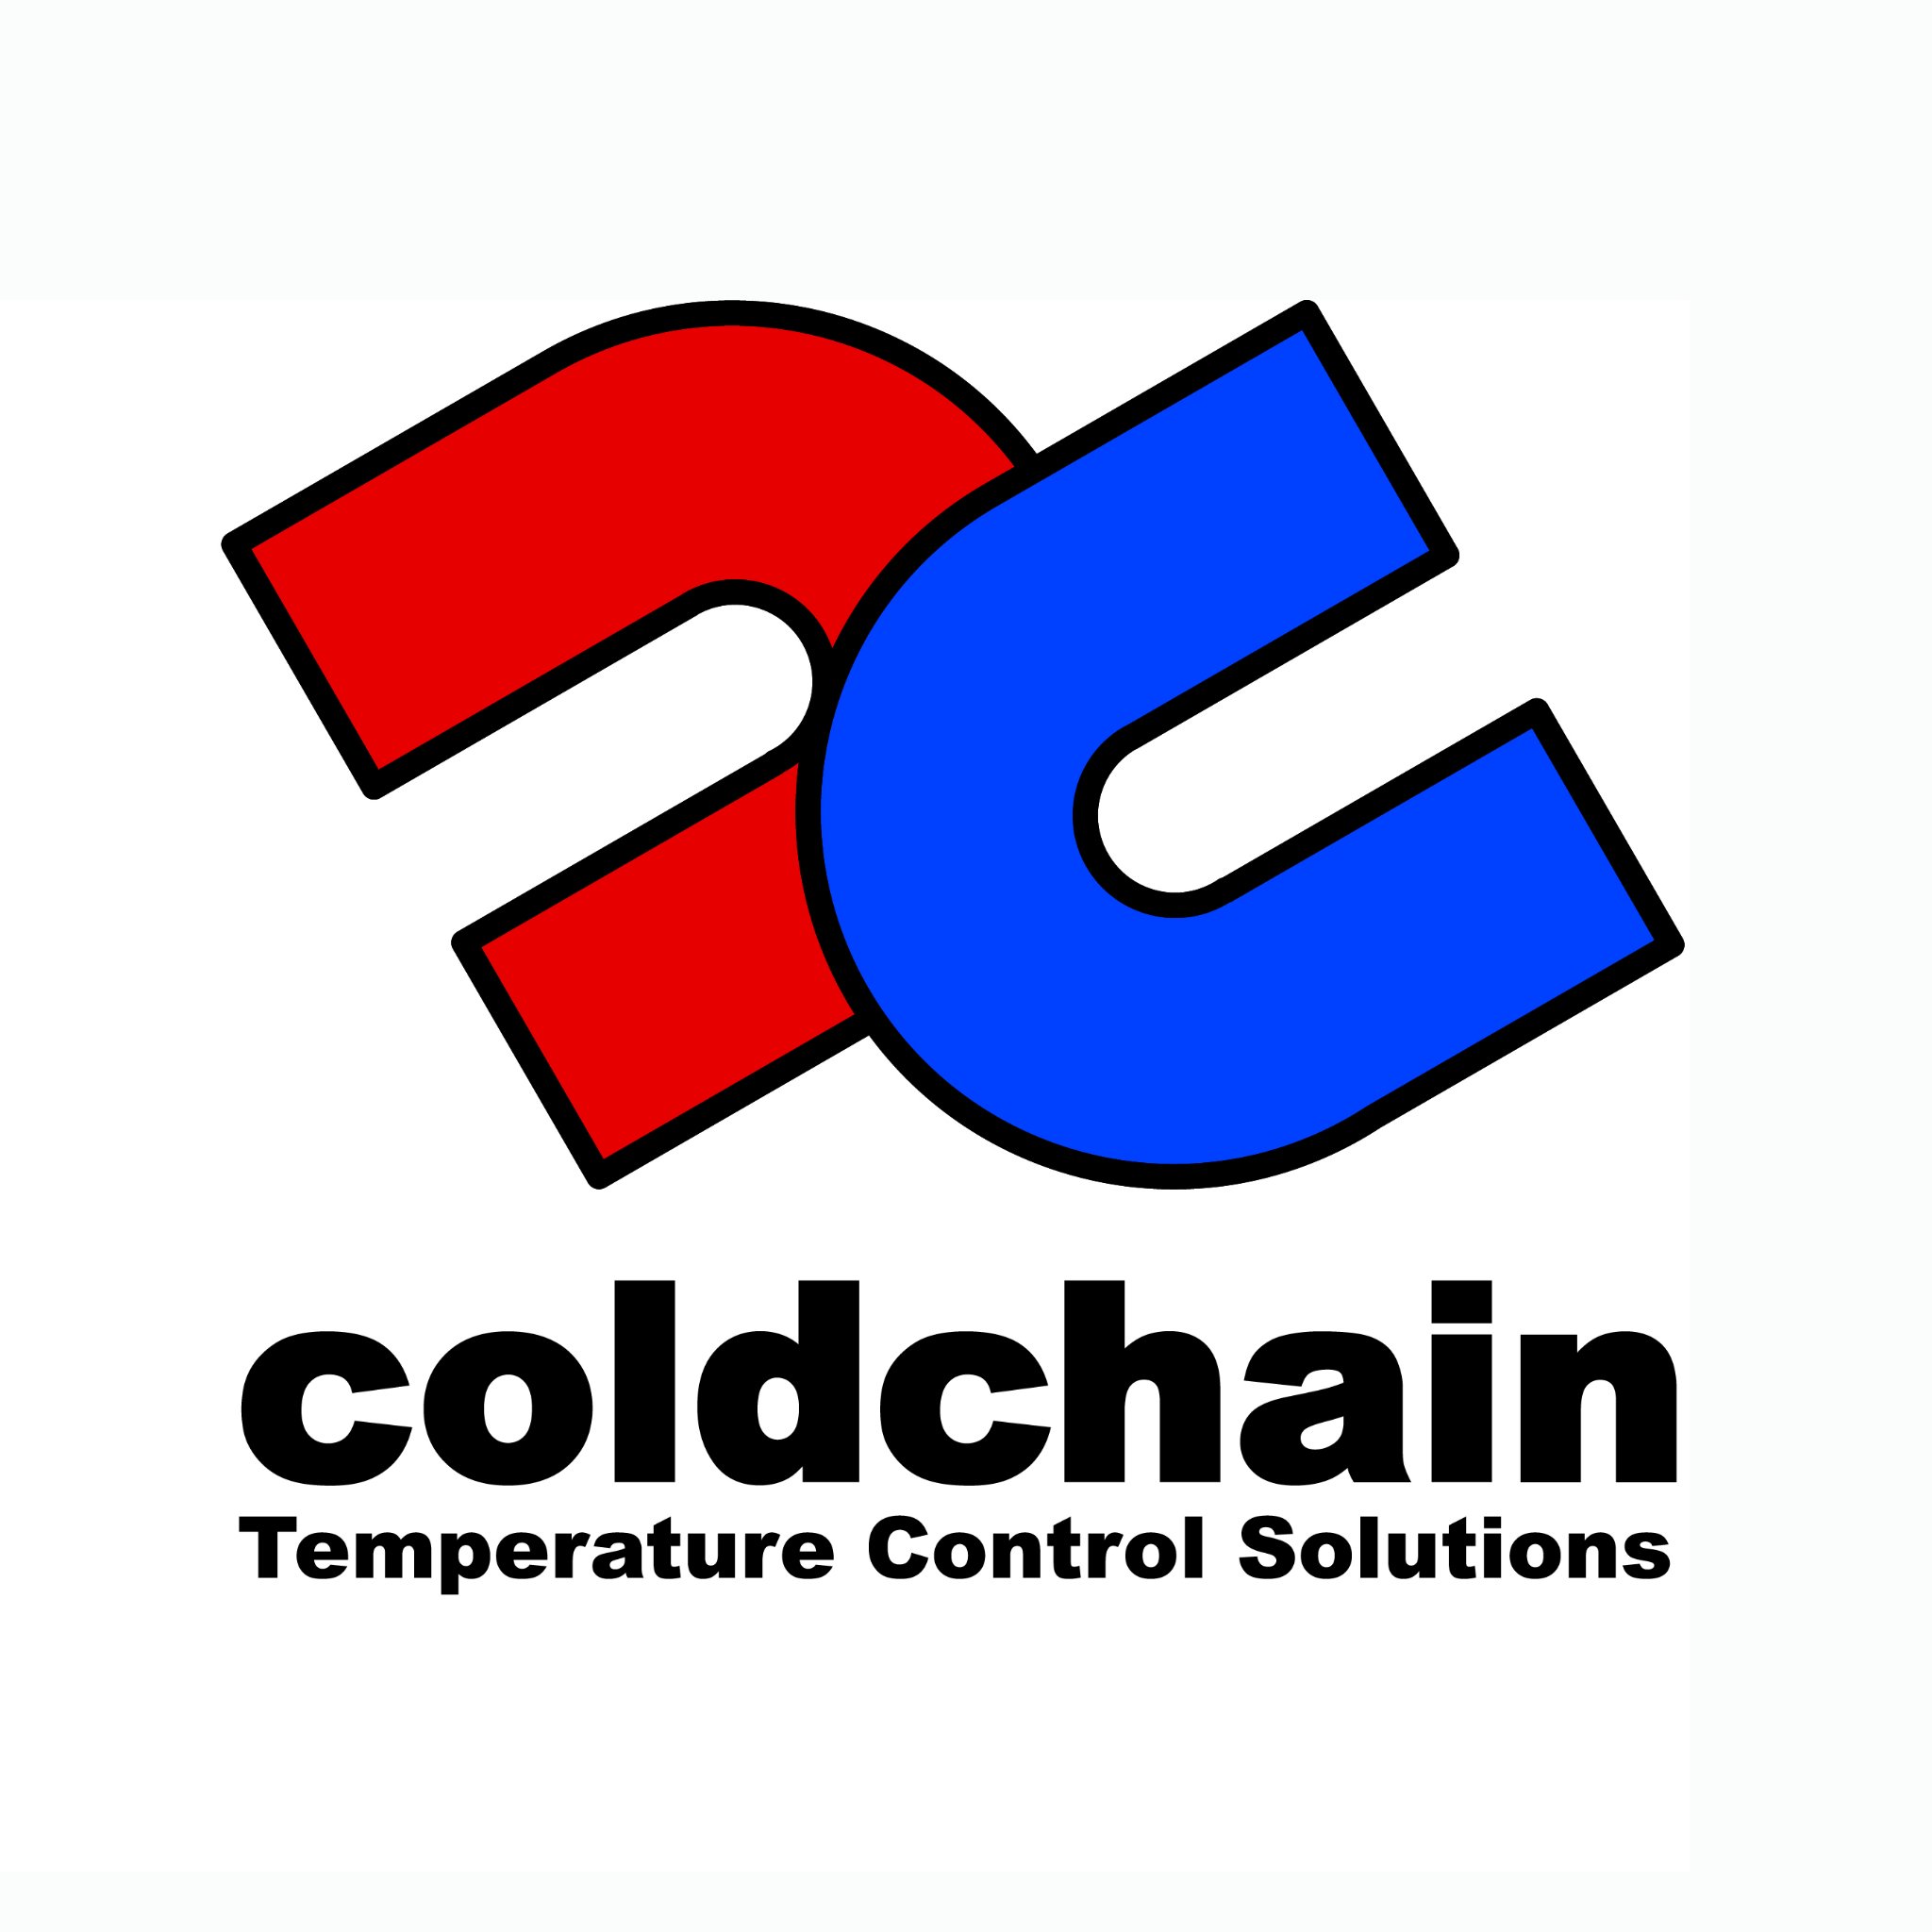 Coldchain Temperature Control. Leaders in van refrigeration and mobile temperature control. Irish distributor of Eberspacher Vehicle Heating Systems.